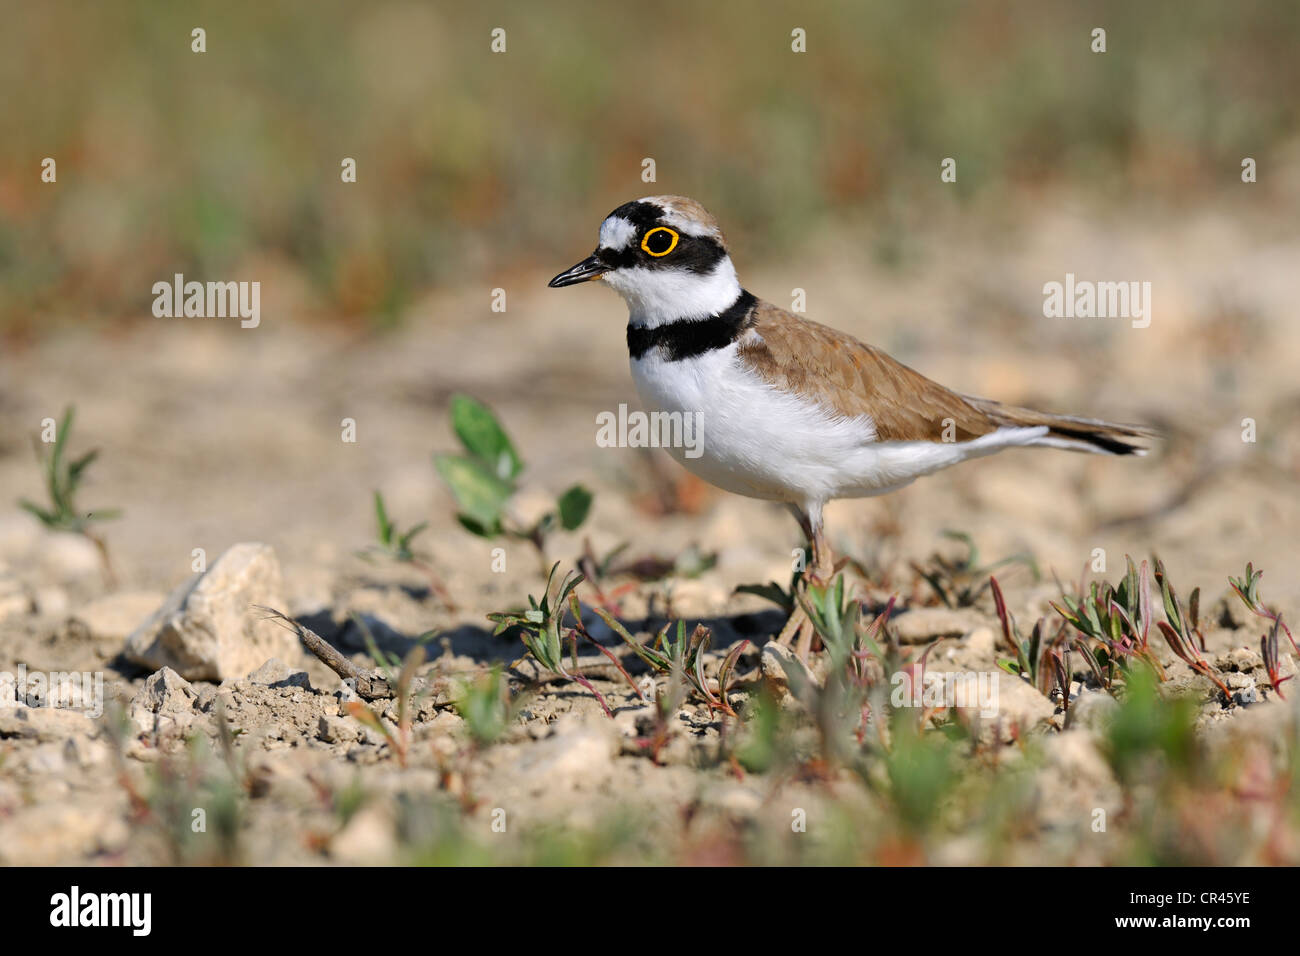 Little ringed plover (Charadrius dubius), Lechauen, wetlands of the Lech River, Swabia region, Bavaria, Germany, Europe Stock Photo